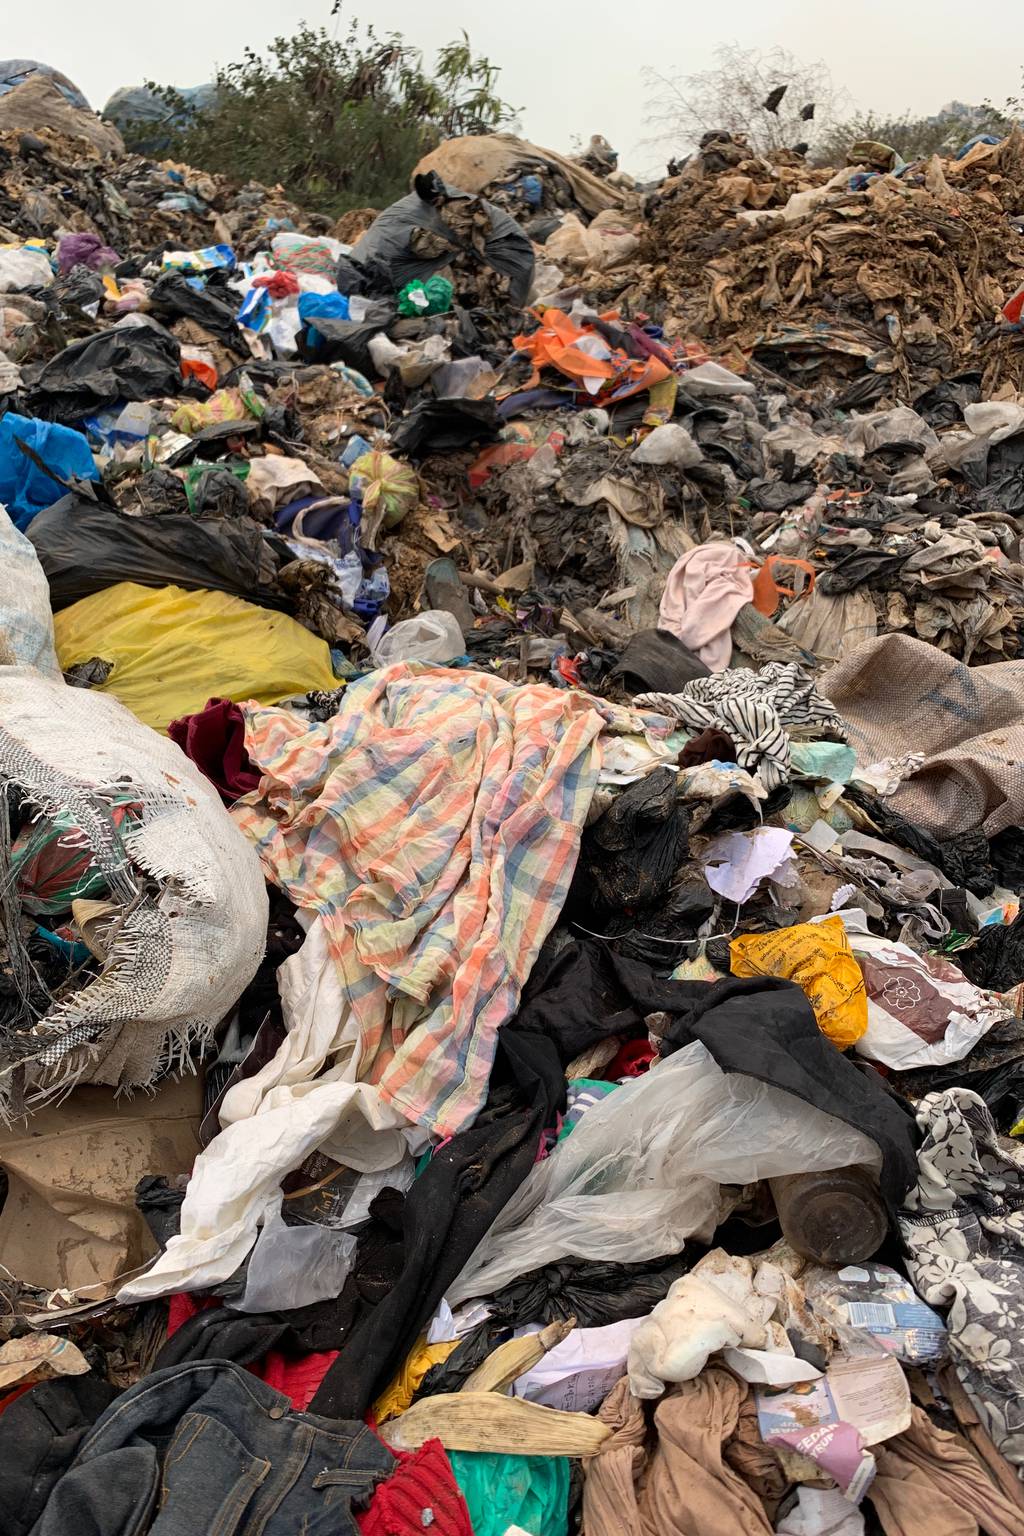 Clothing waste mounting in the Kpone landfill in Accra. Maxine Bédat.